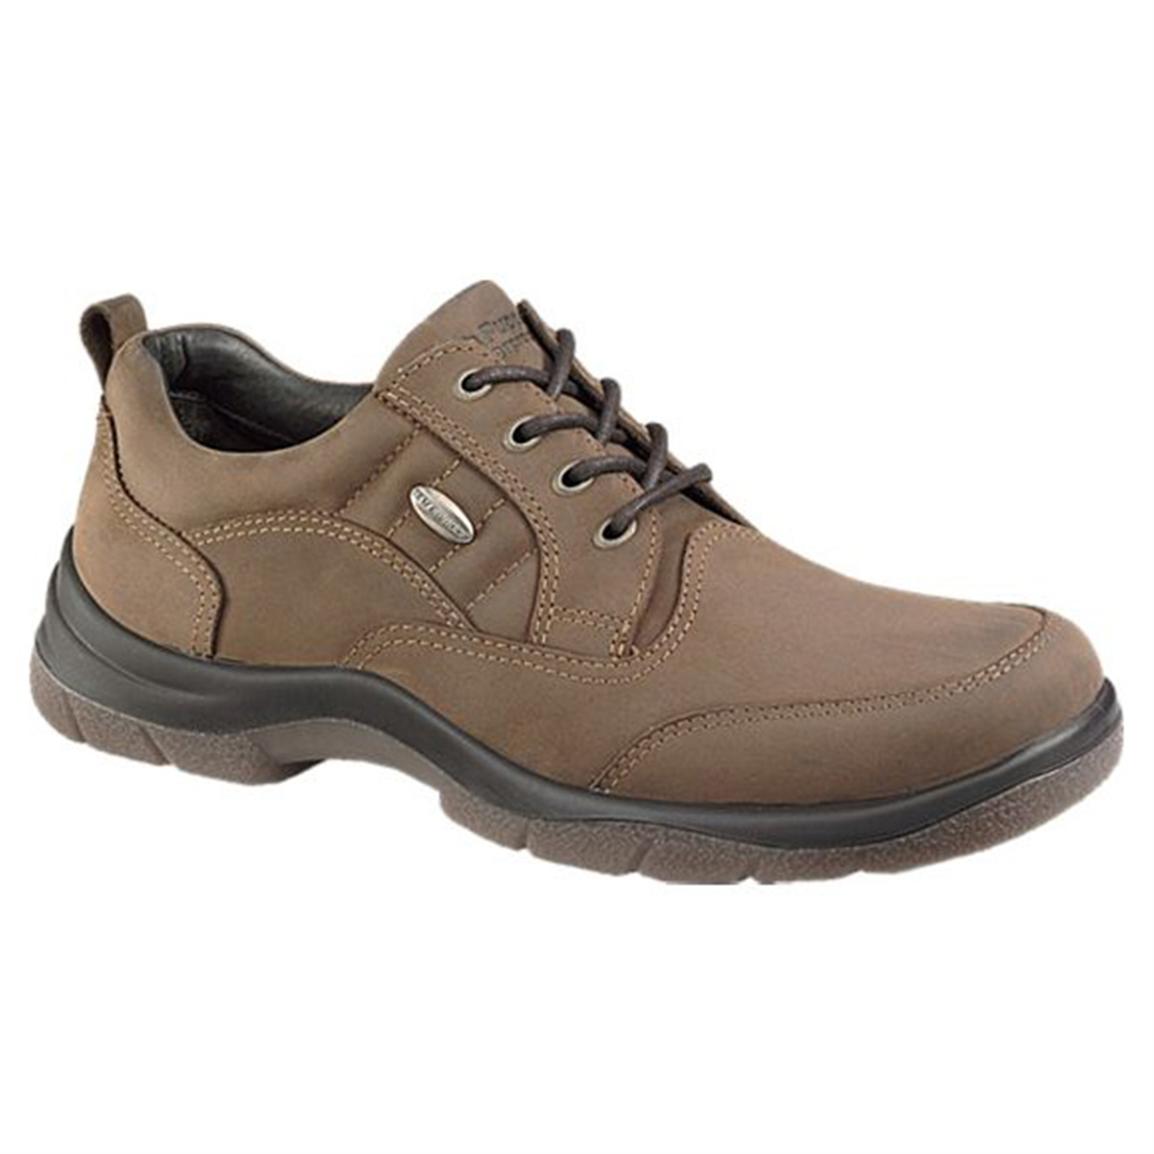 Men's Hush PuppiesÂ® Stamina Shoes - 164475, Casual Shoes at Sportsman ...